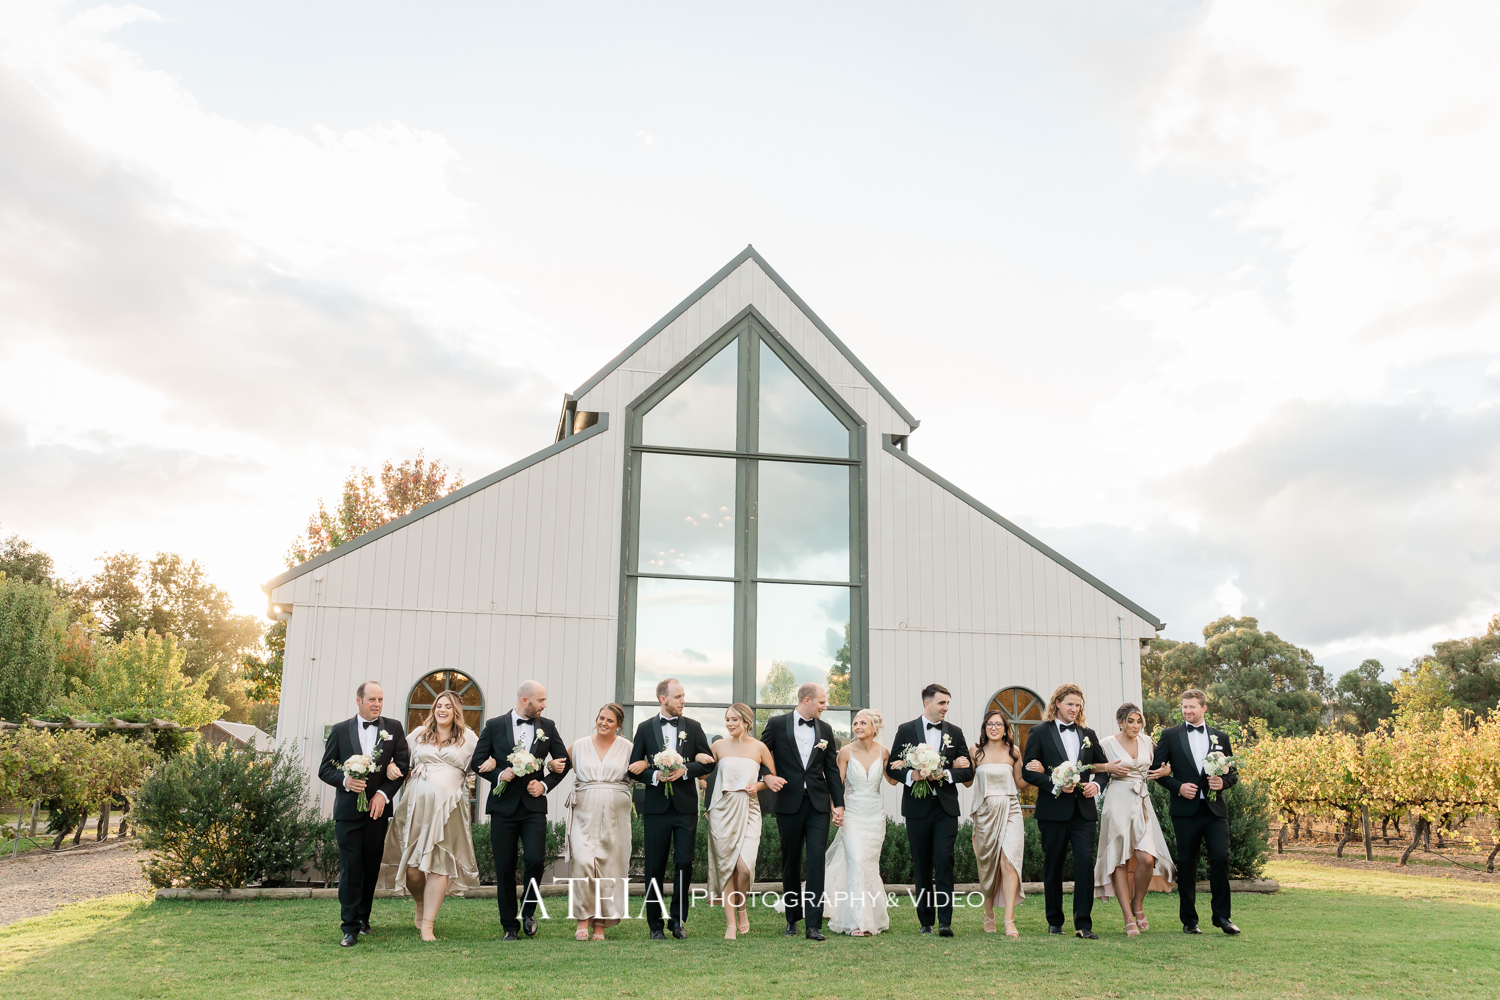 , Amy and Justin&#8217;s wedding at Immerse Winery captured by ATEIA Photography &#038; Video